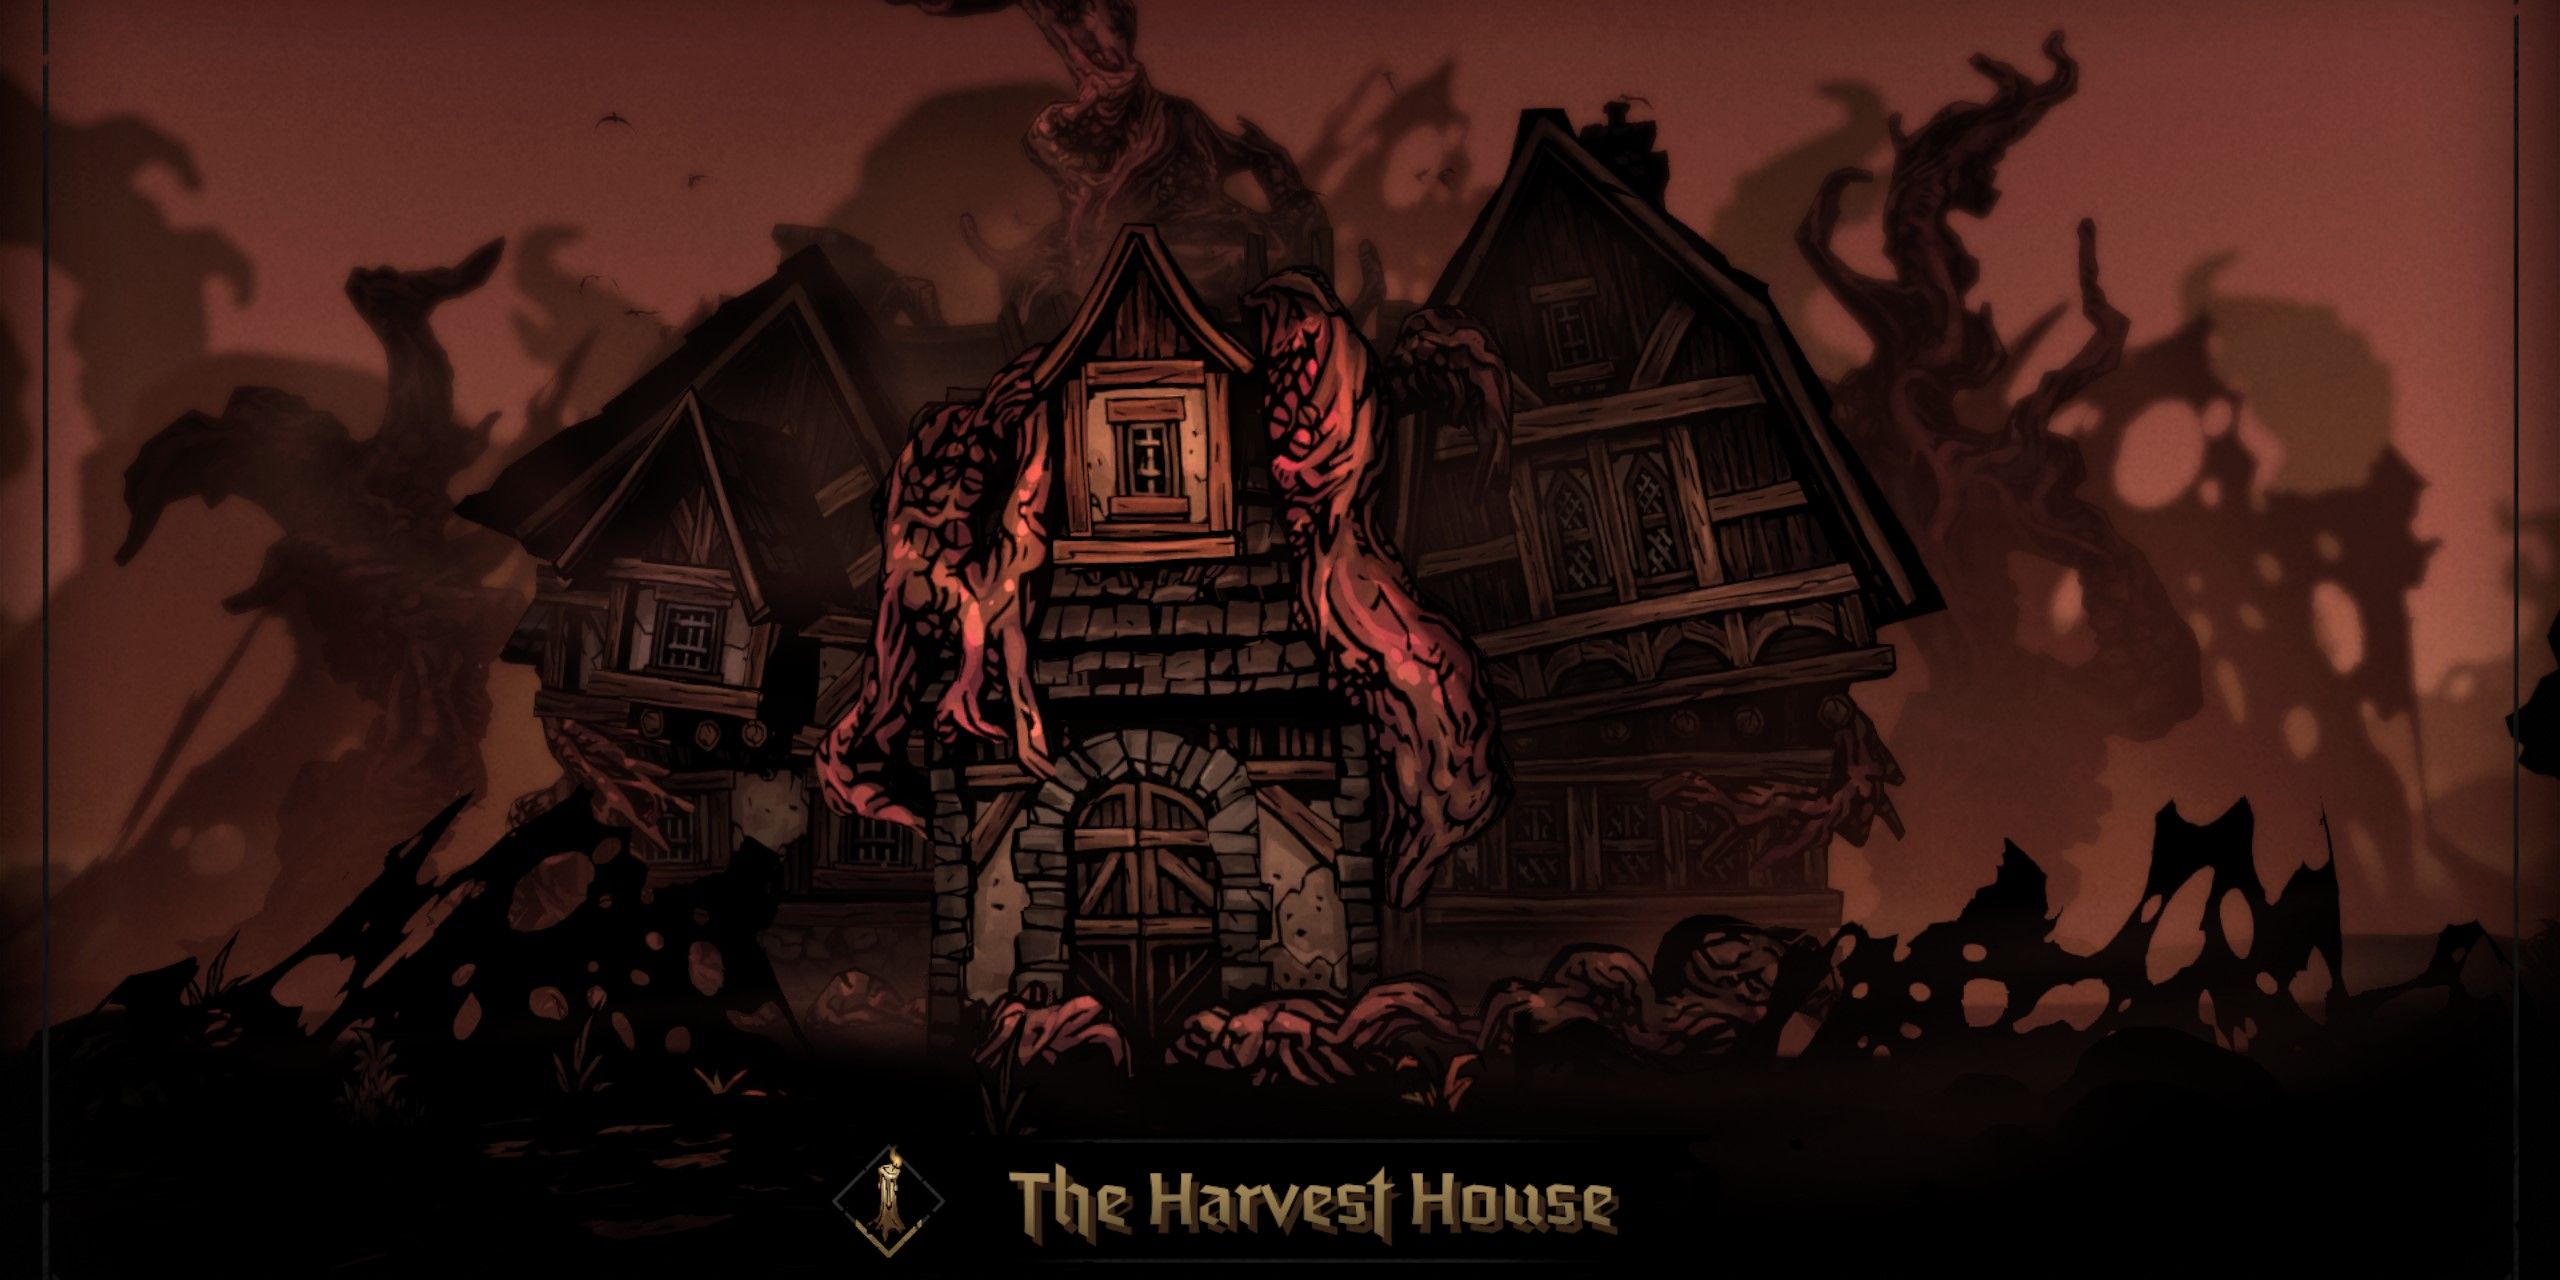 The Lair in the Foetor from Darkest Dungeon 2, The Harvest House